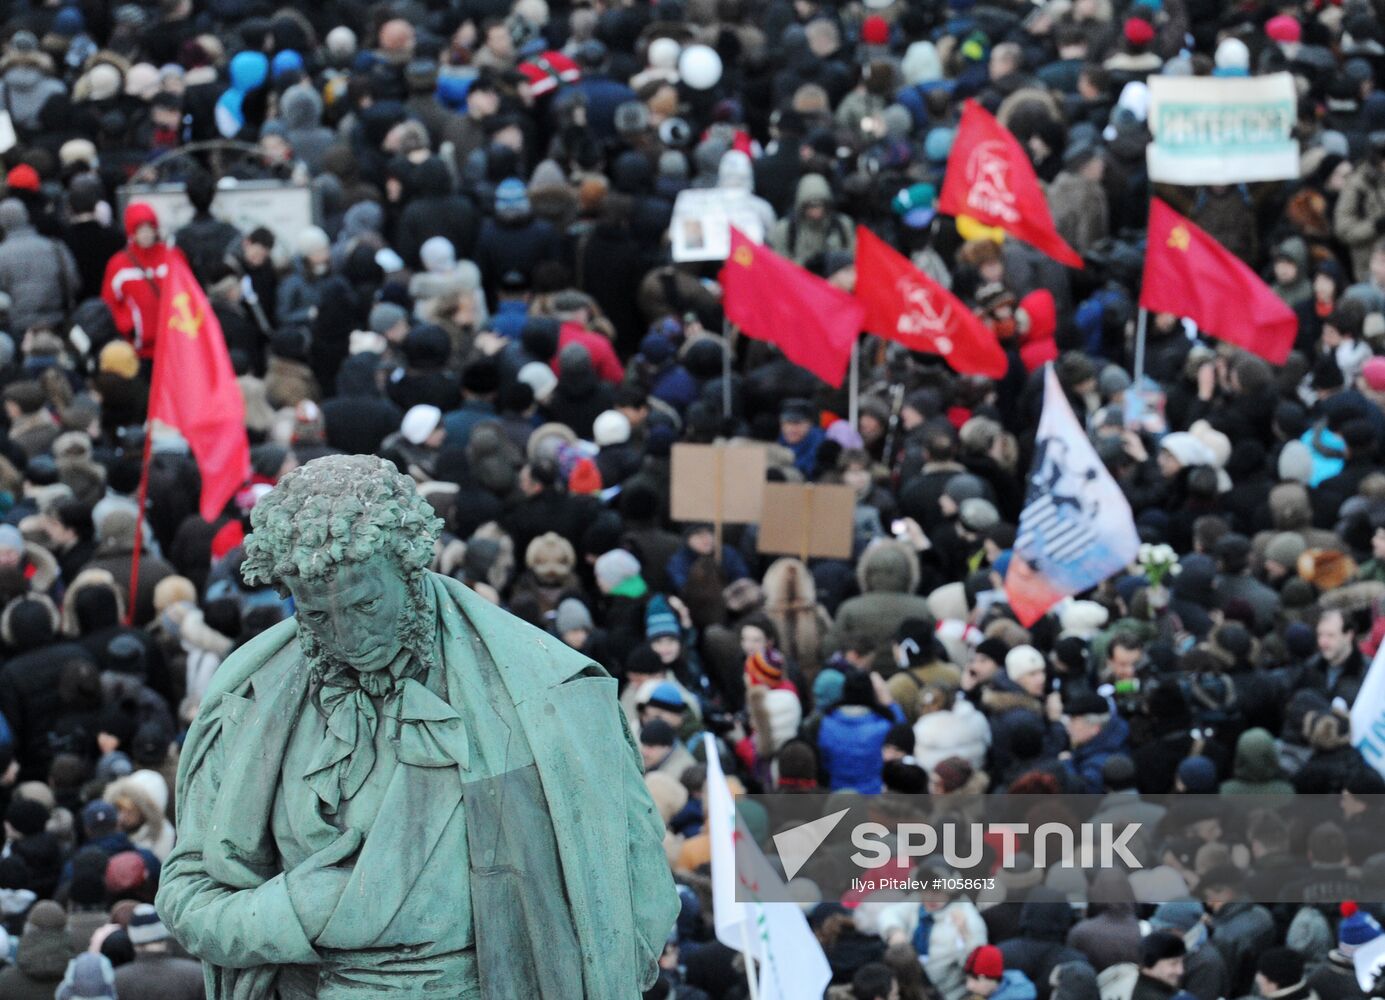 "For Fair Elections" rally in Moscow's Pushkin Square